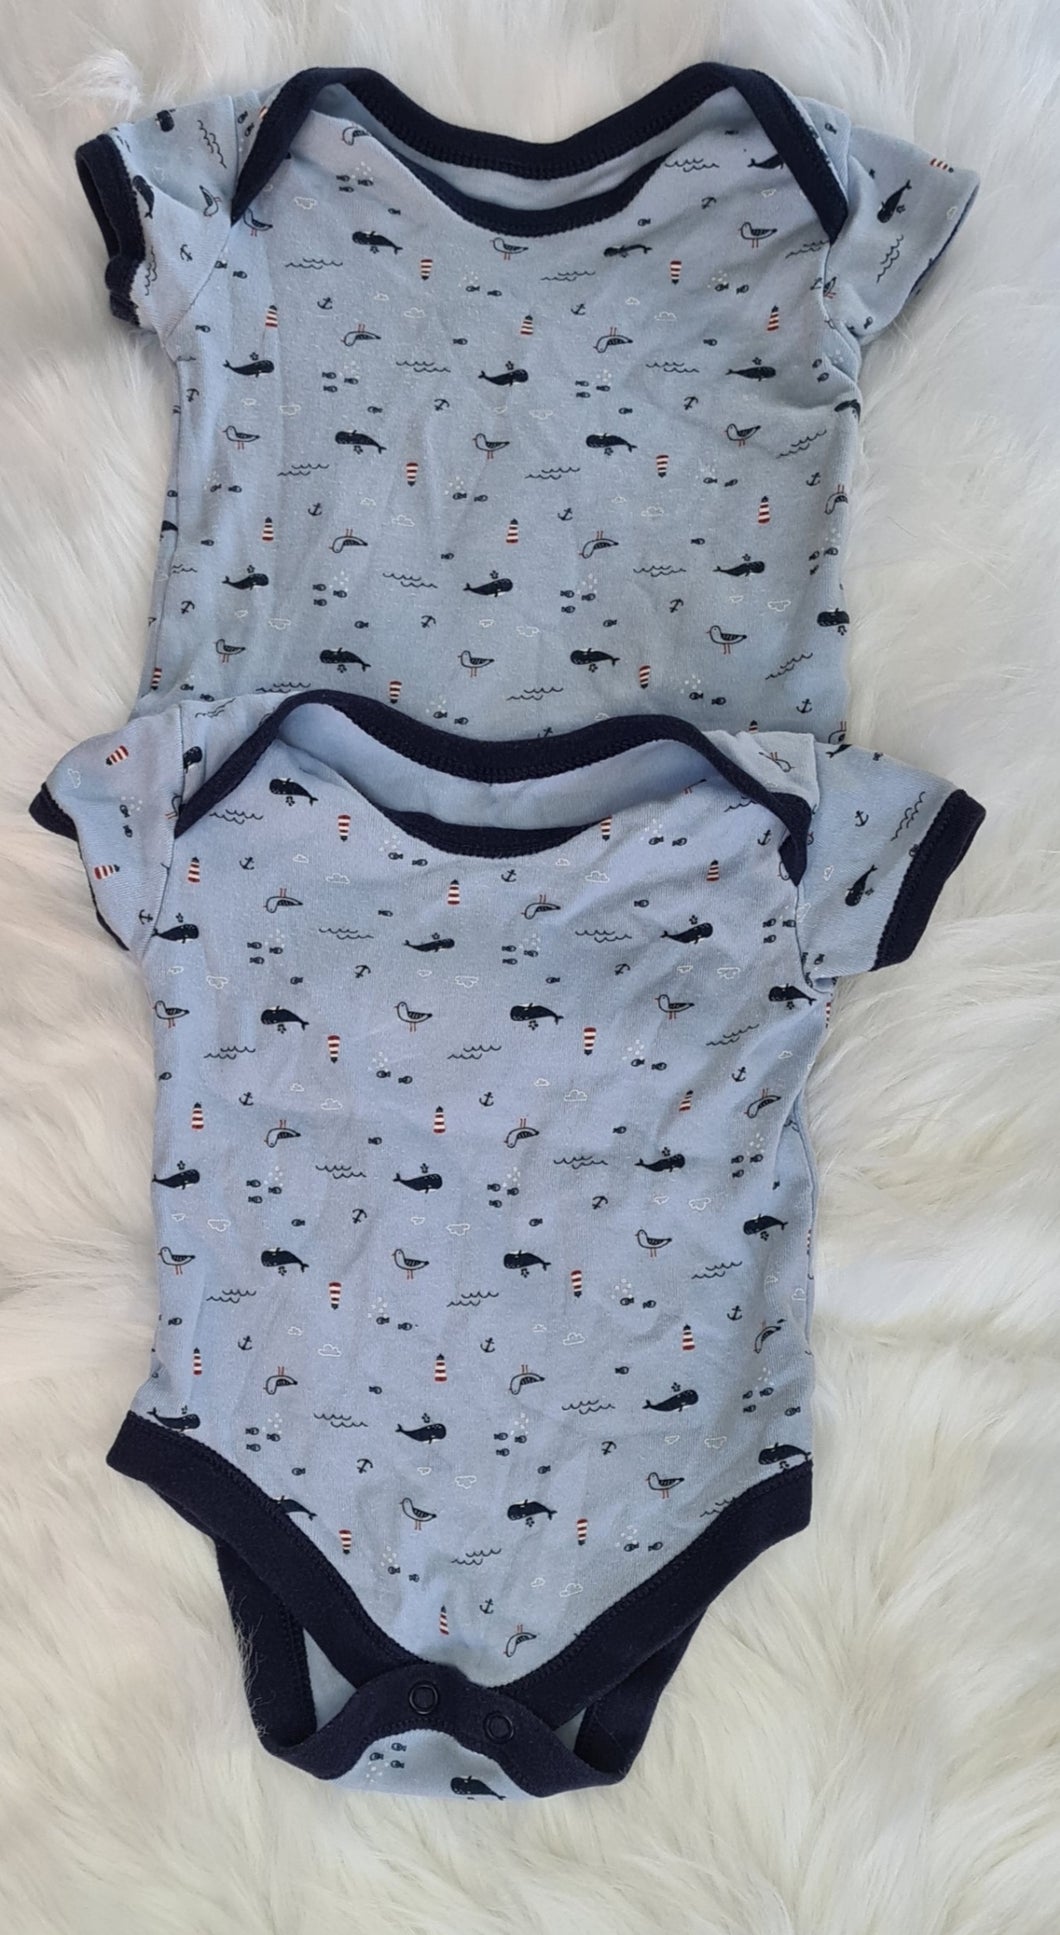 Boys 3-6 Months - 2 Piece Vest Set - Whale and Seagull